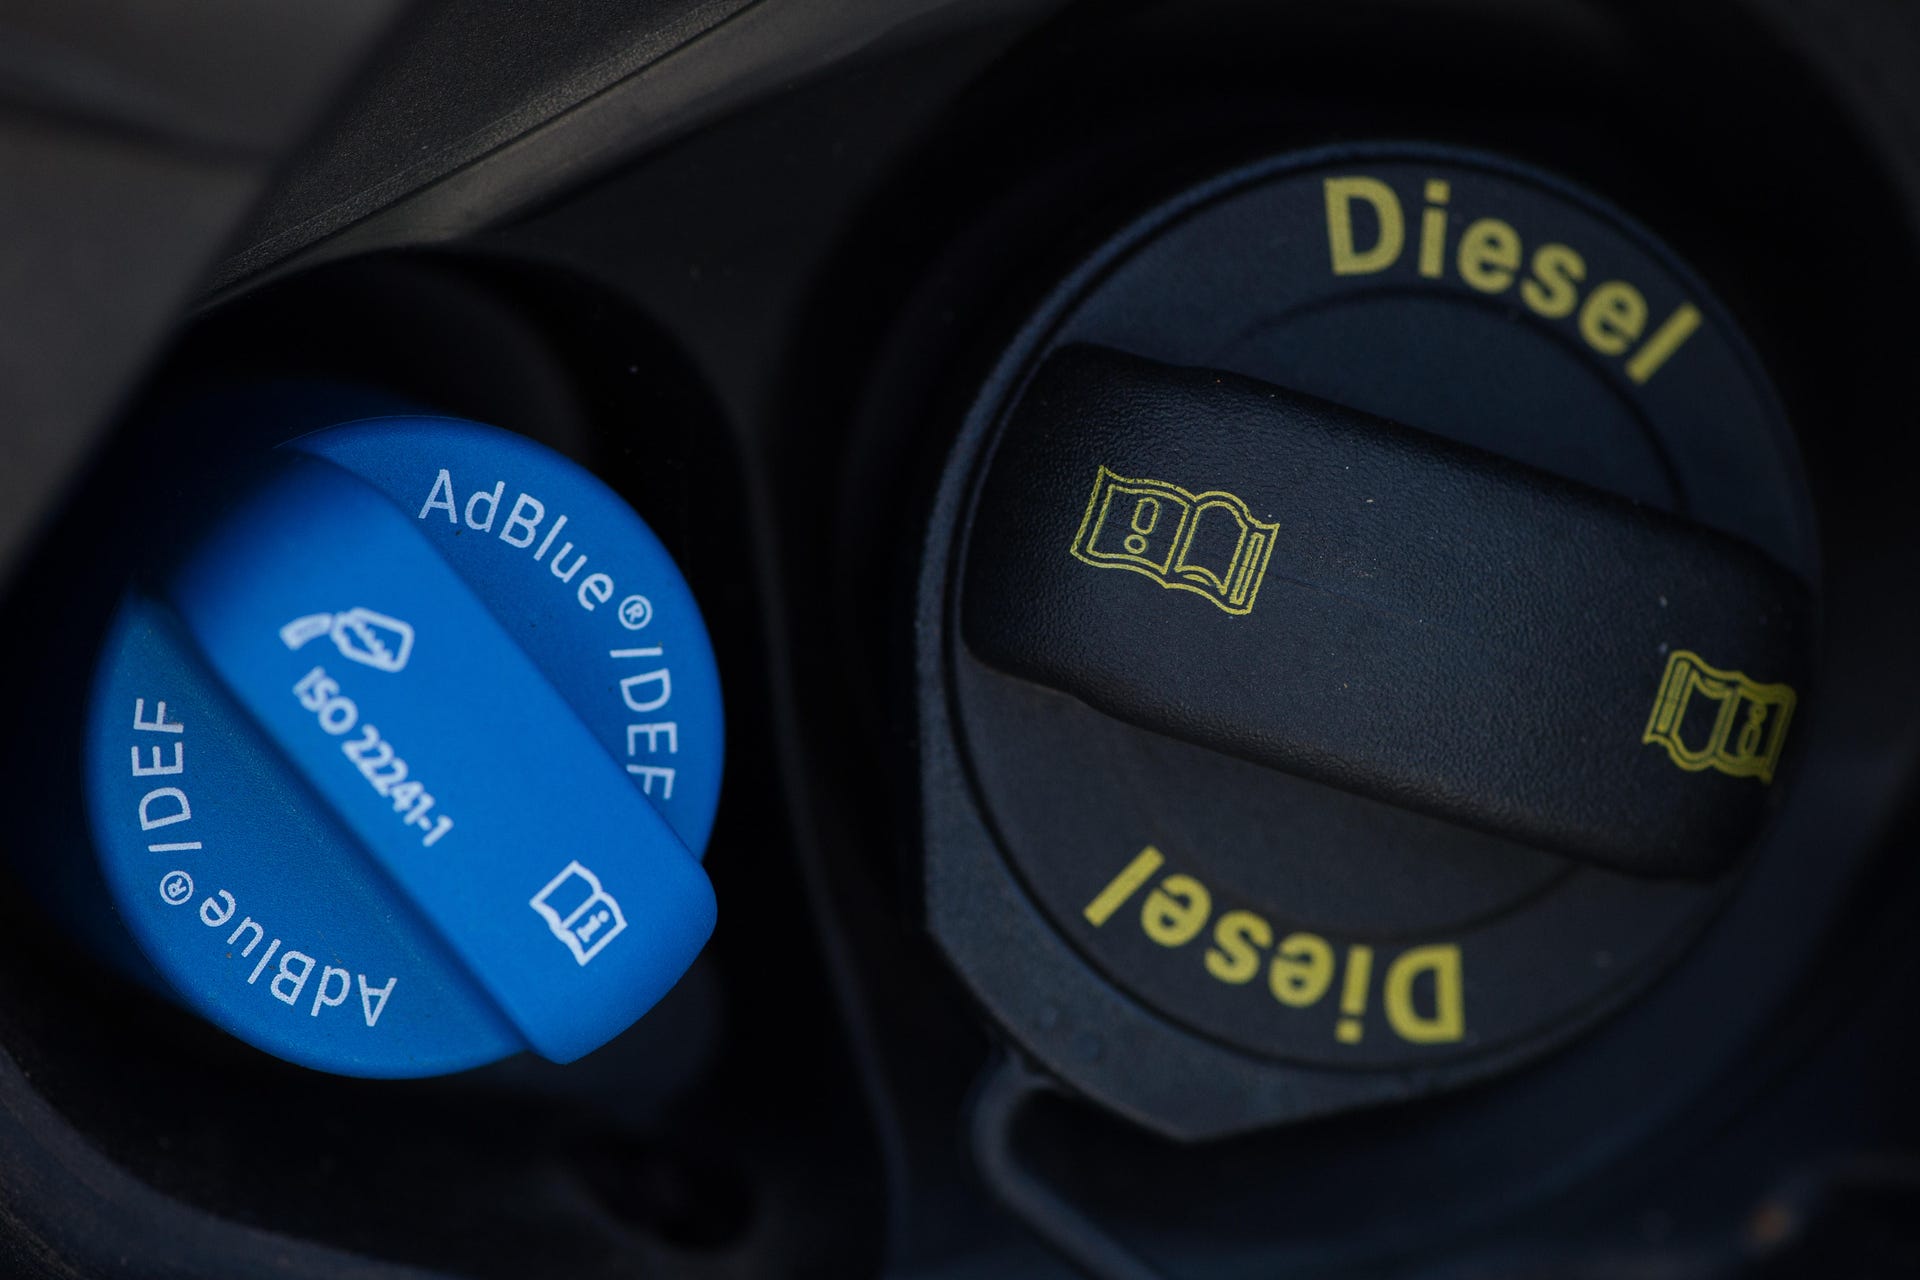 What is AdBlue and what does it do in diesel cars?